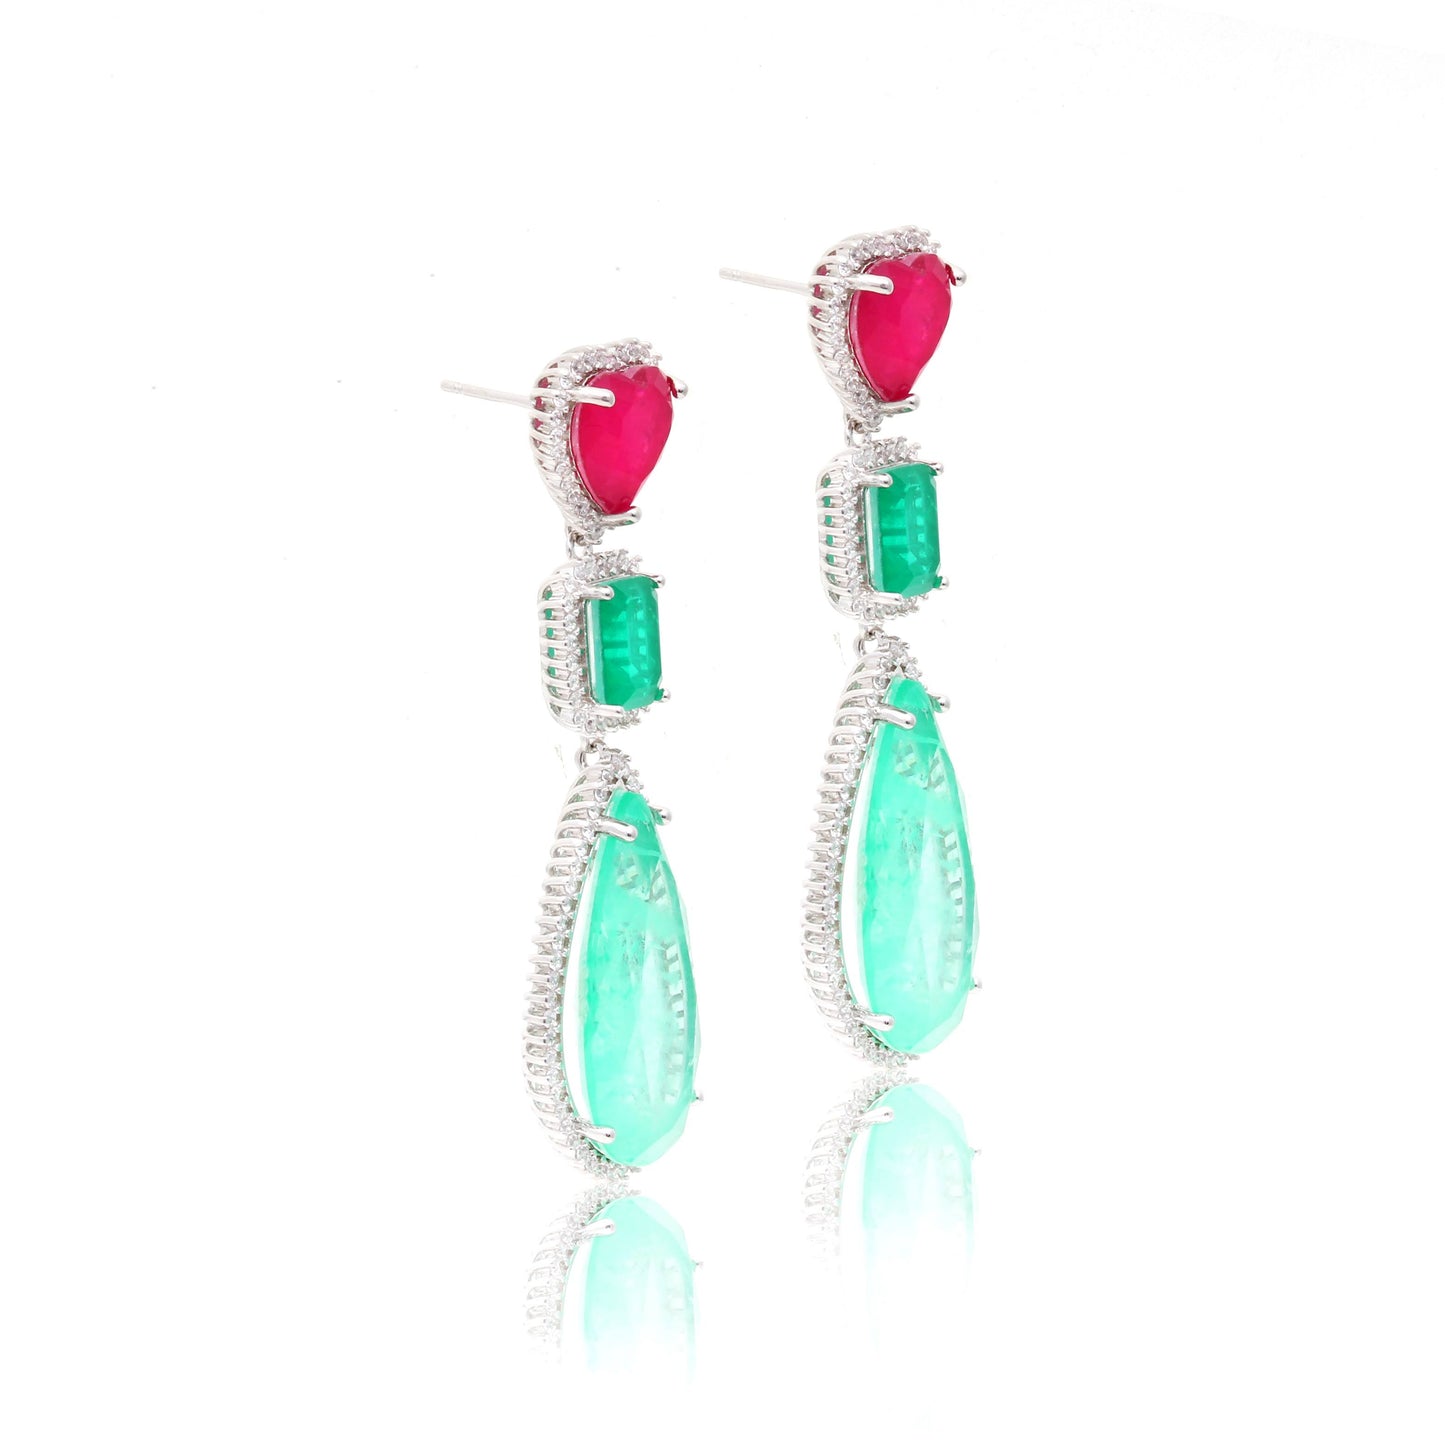 Drop and heart earrings with pink tourmaline